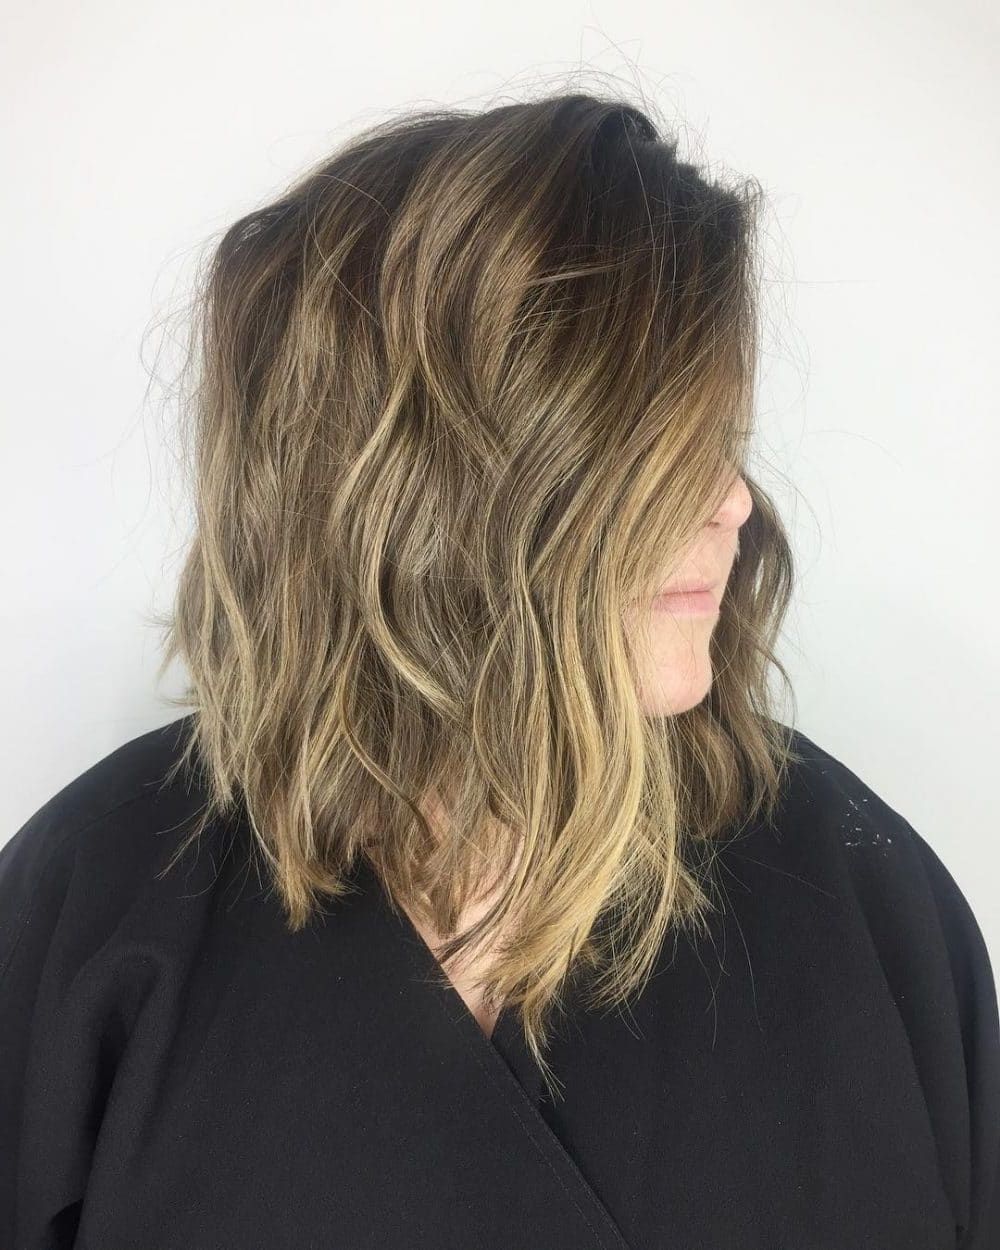 Preferred Casual A Line Bob Hairstyles Pertaining To 33 Hottest A Line Bob Haircuts You'll Want To Try In 2019 (Gallery 19 of 20)